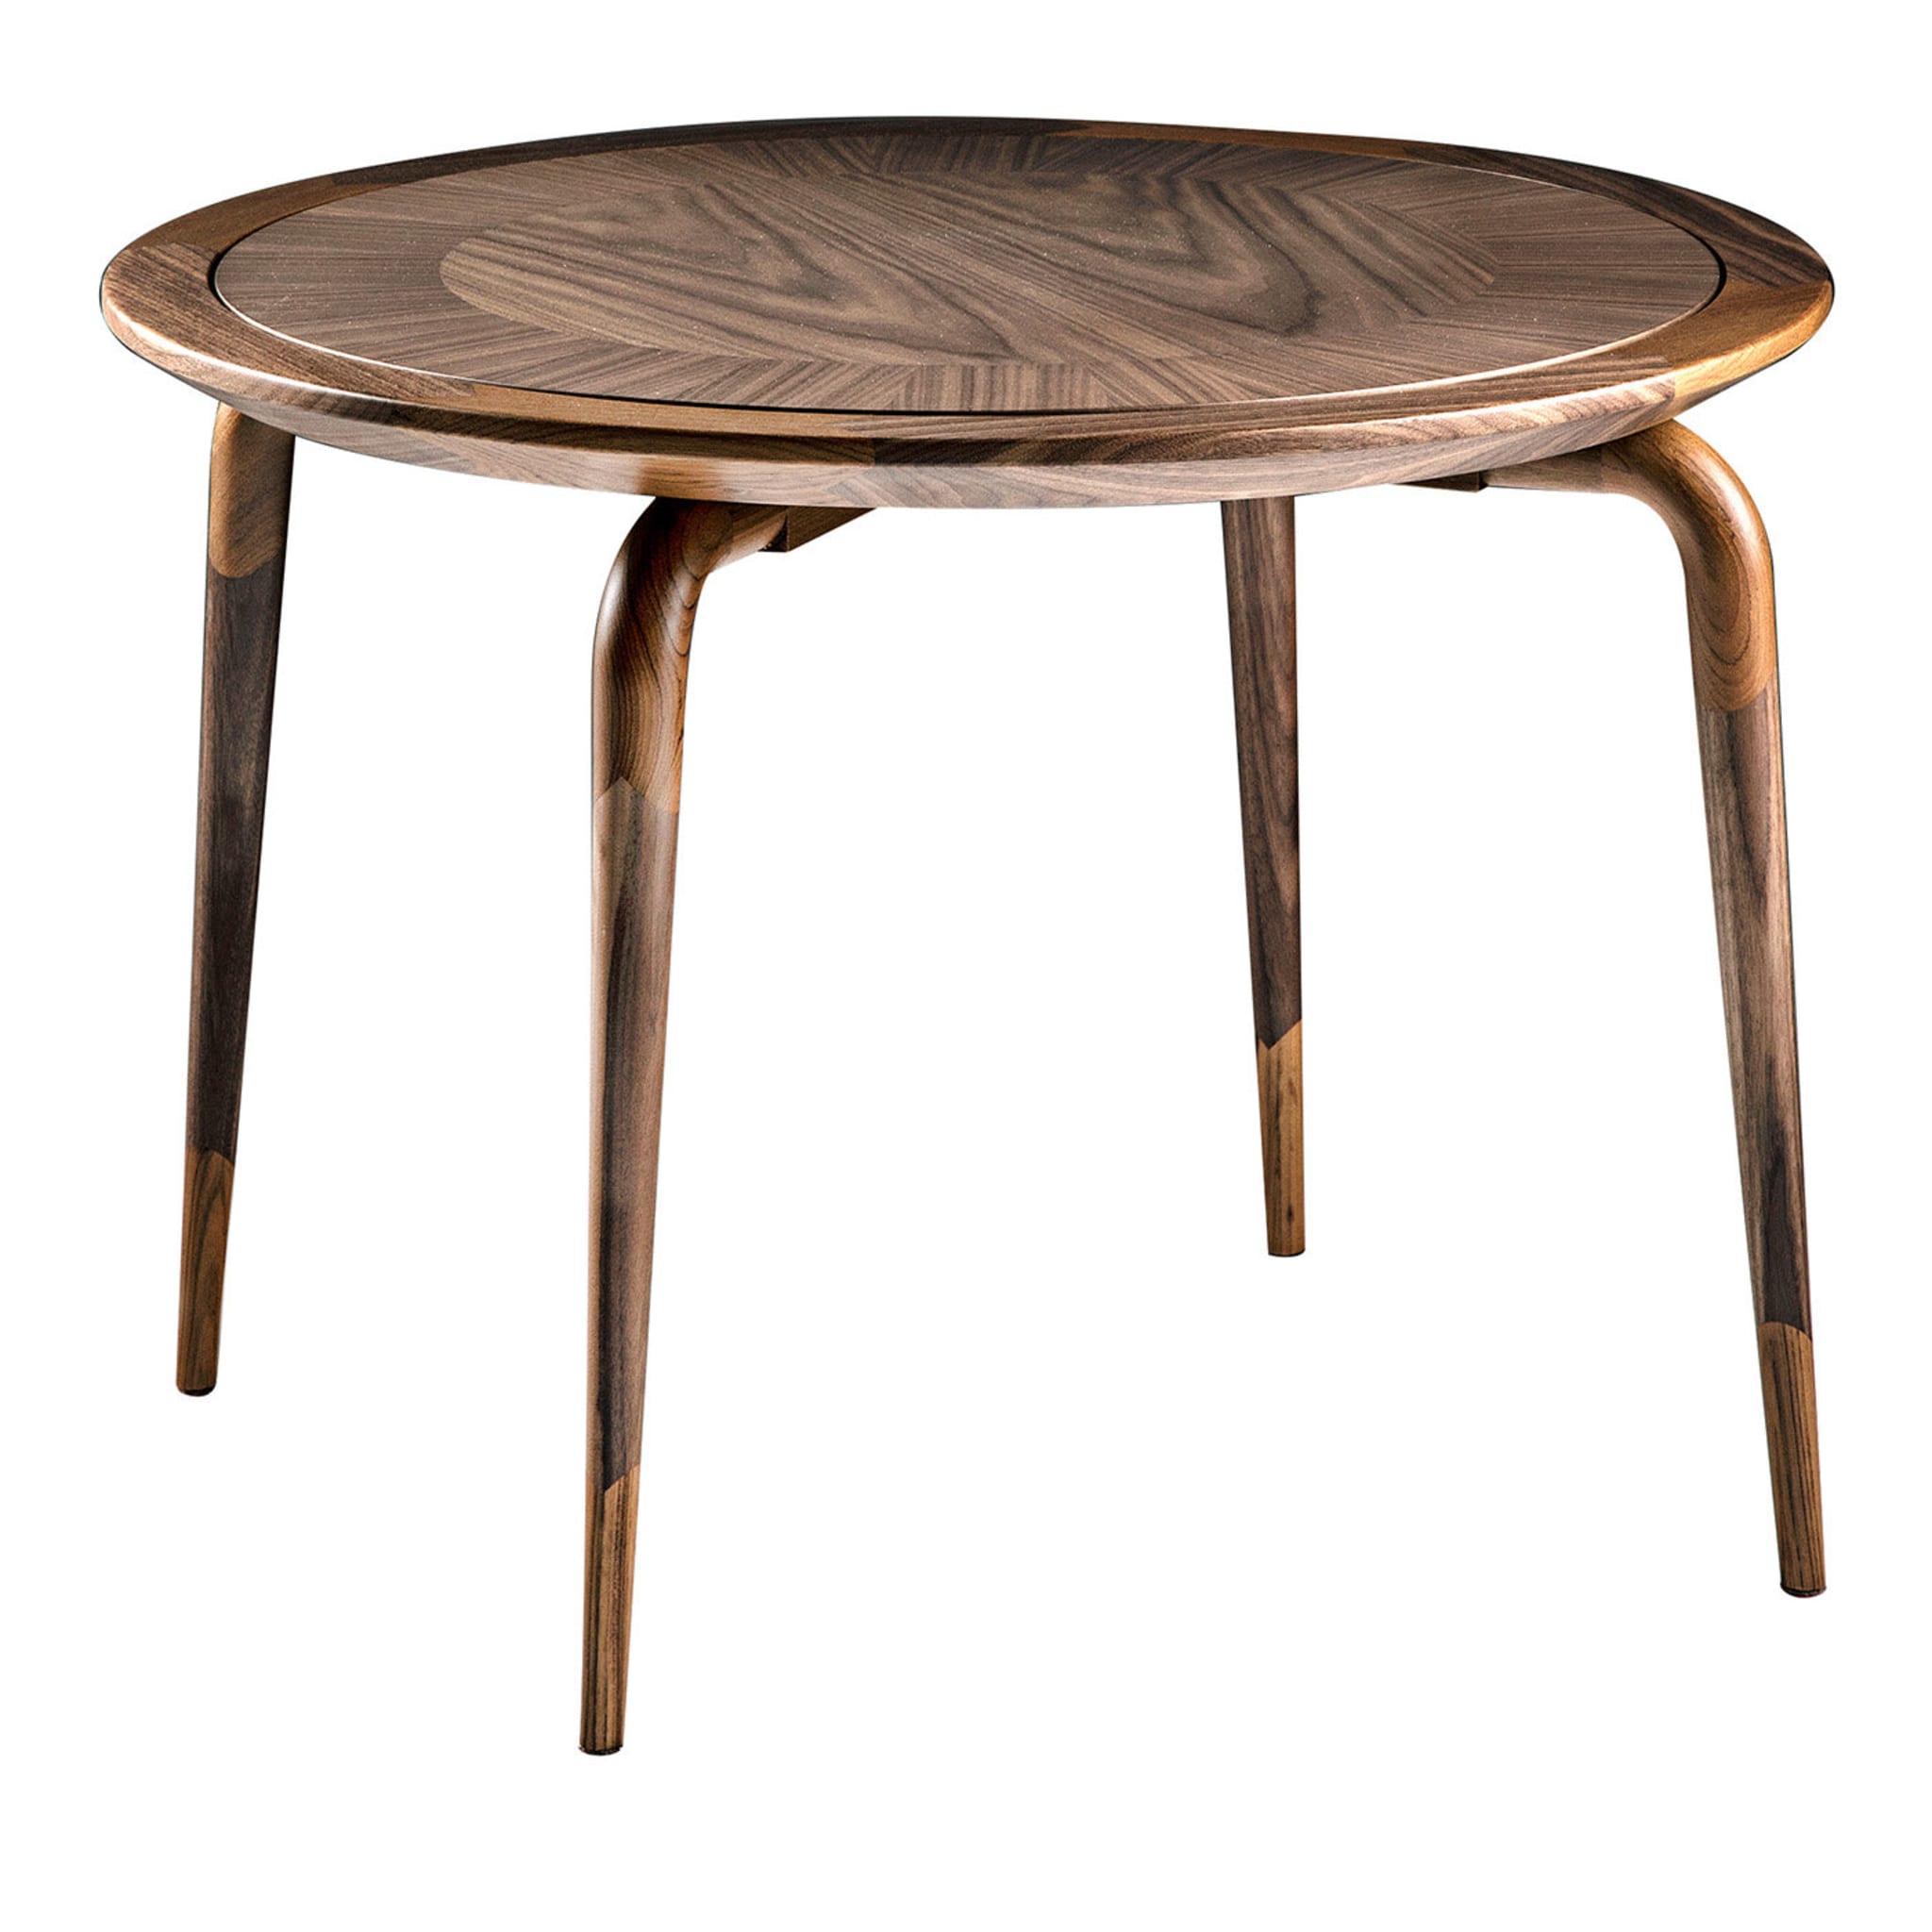 Rosetta Side Table by Luciano Colombo - Main view